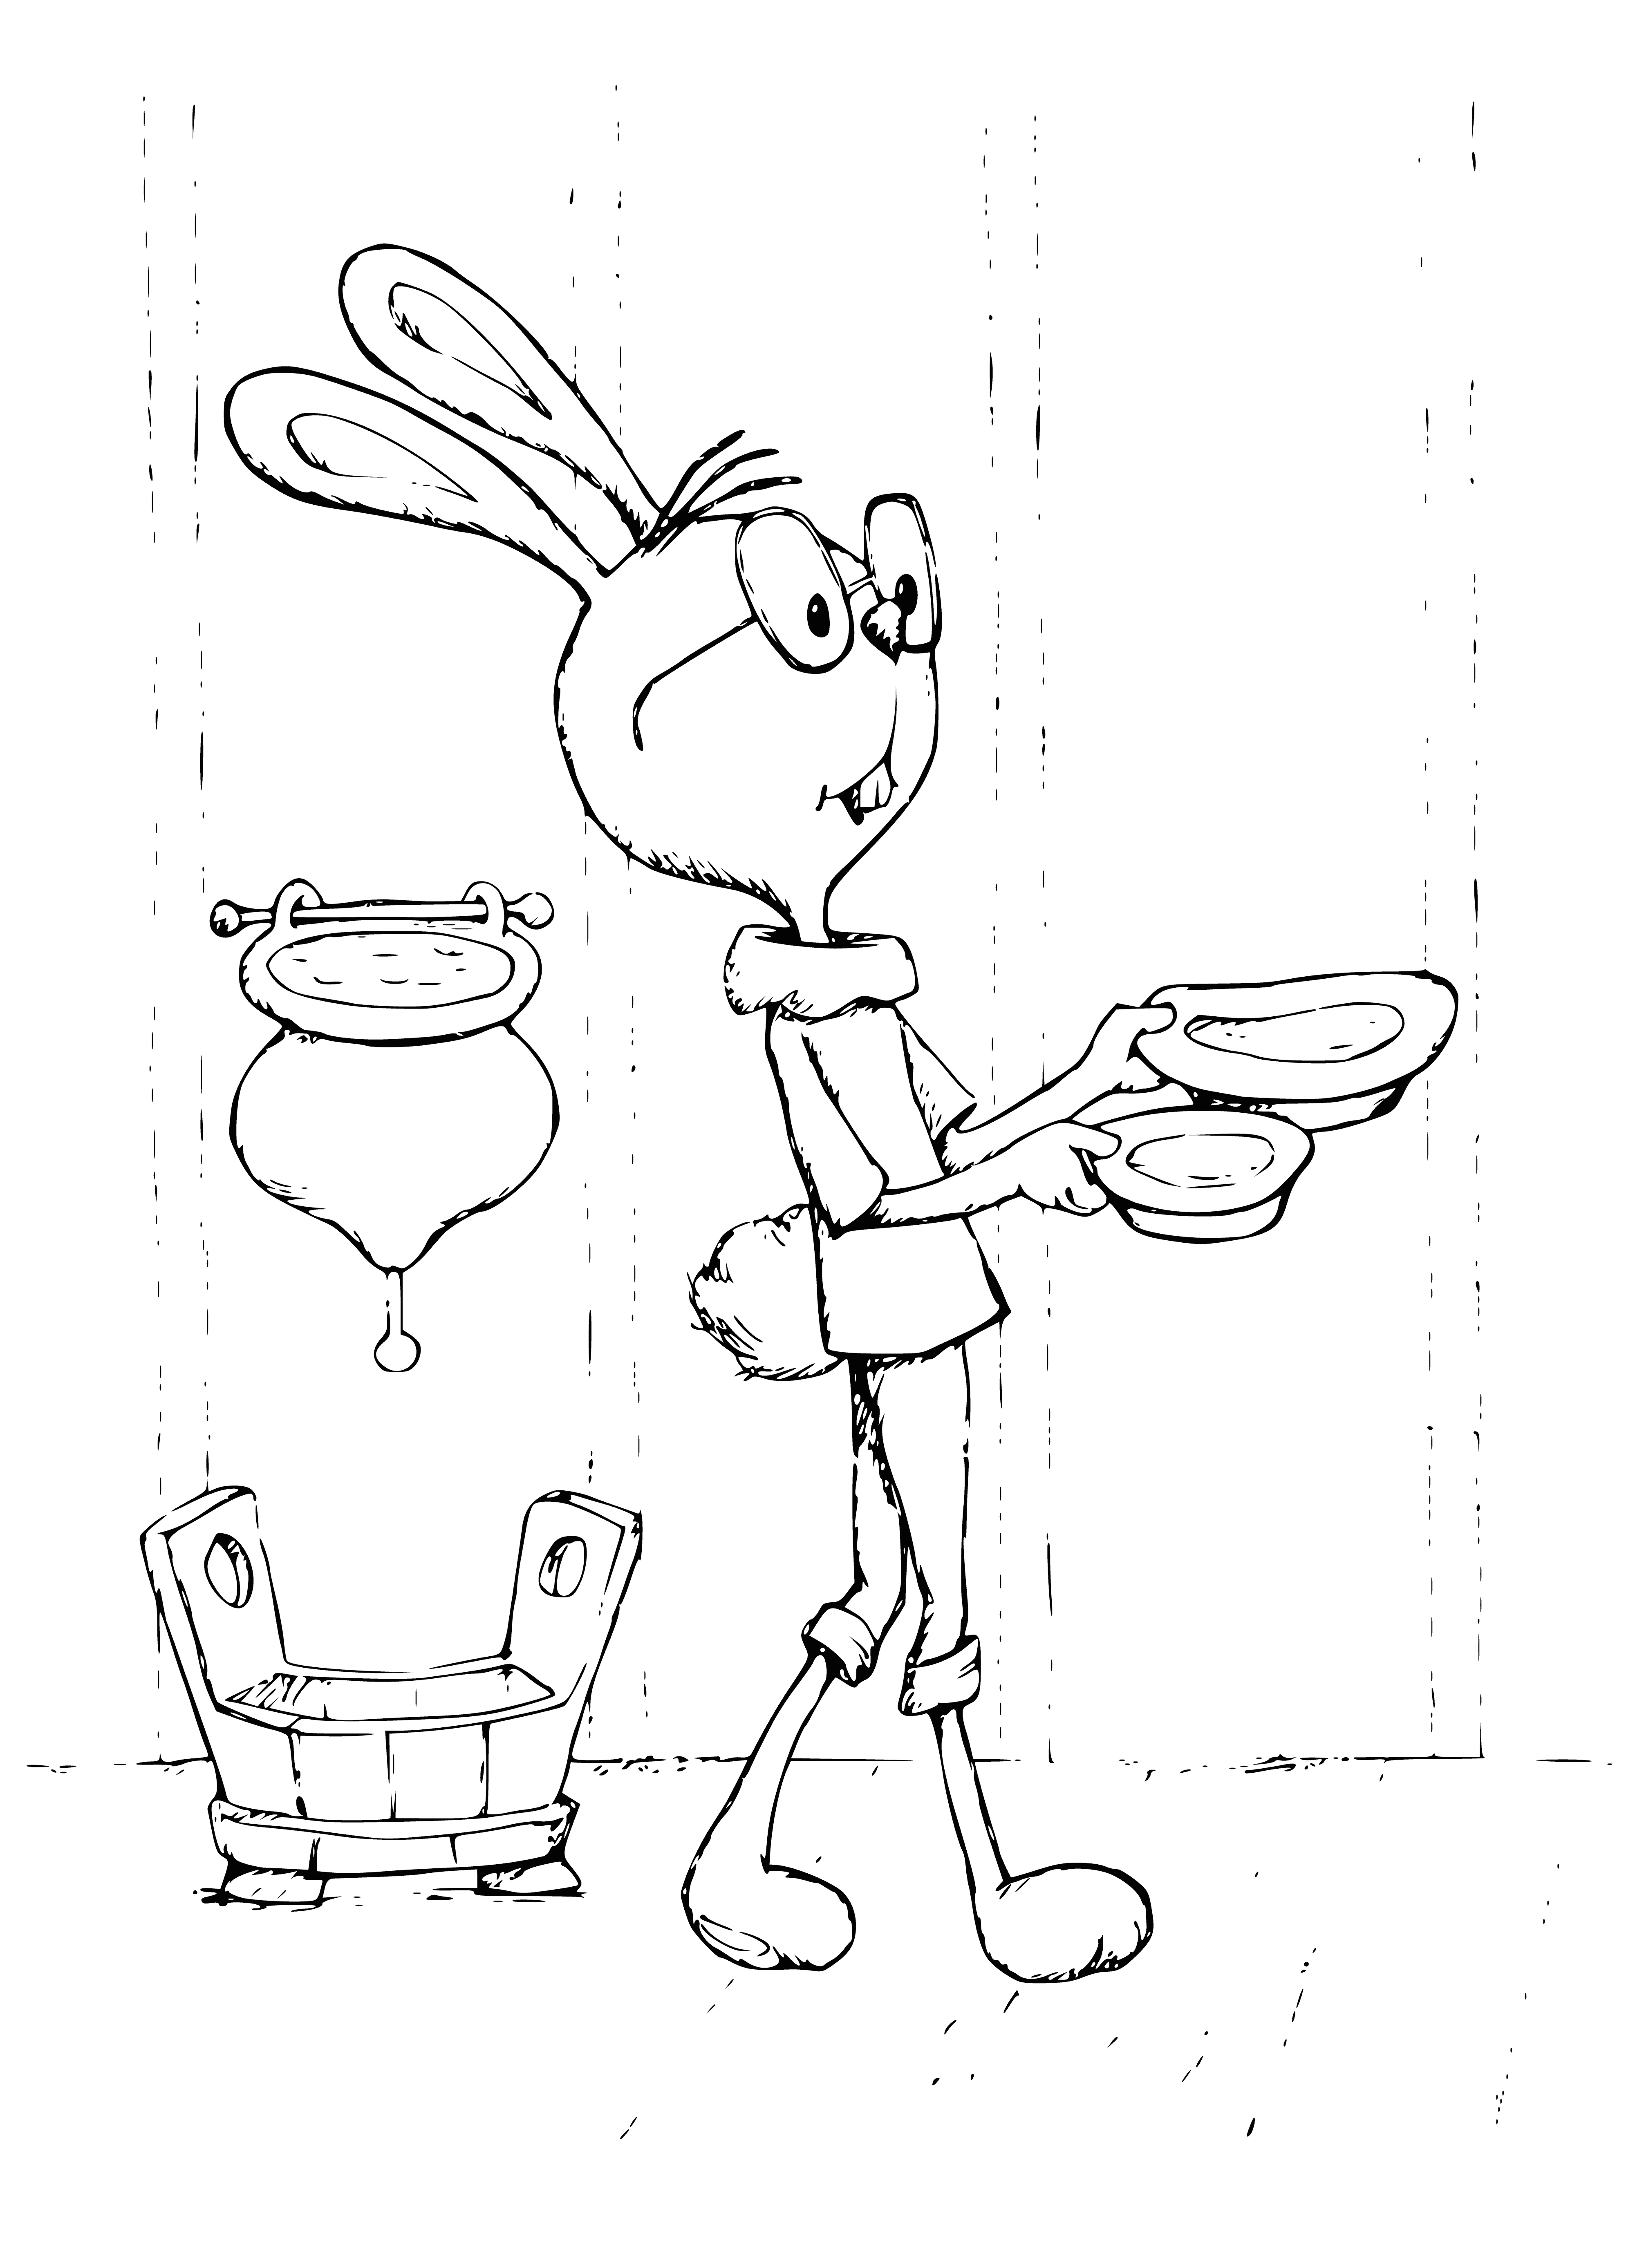 coloring page: Rabbit happily carries treat in its mouth in a coloring page. Ears perked and cheeks puffed out, likely a type of candy. #Colors